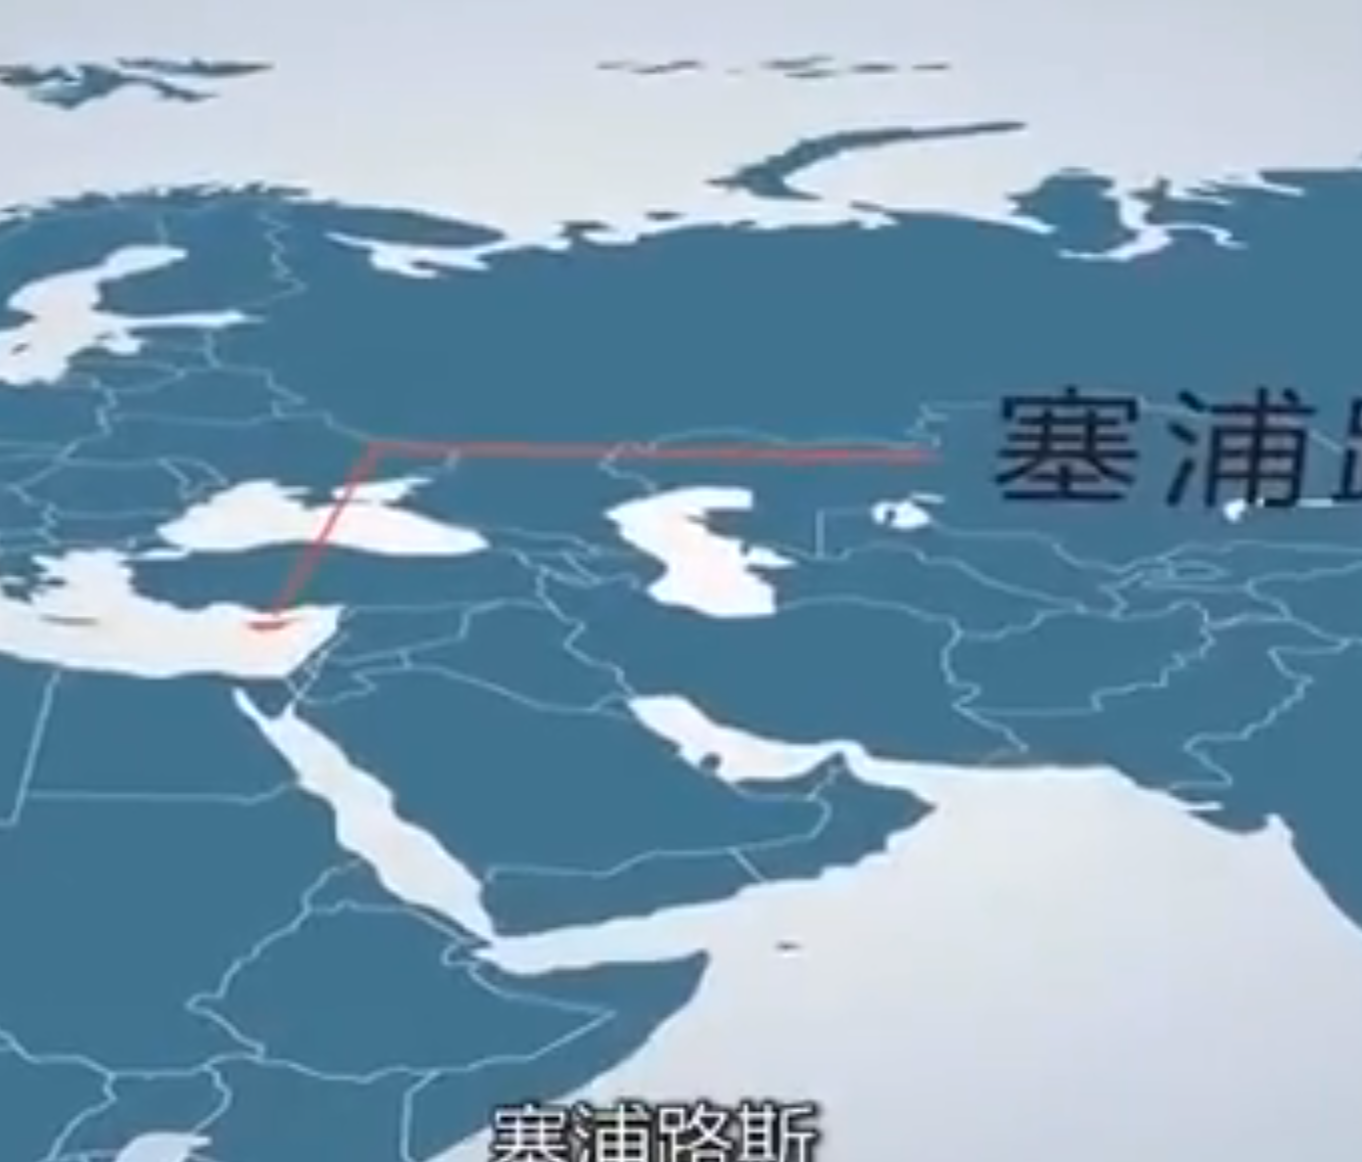 Video: “Mapping China’s Immigrant Investors”